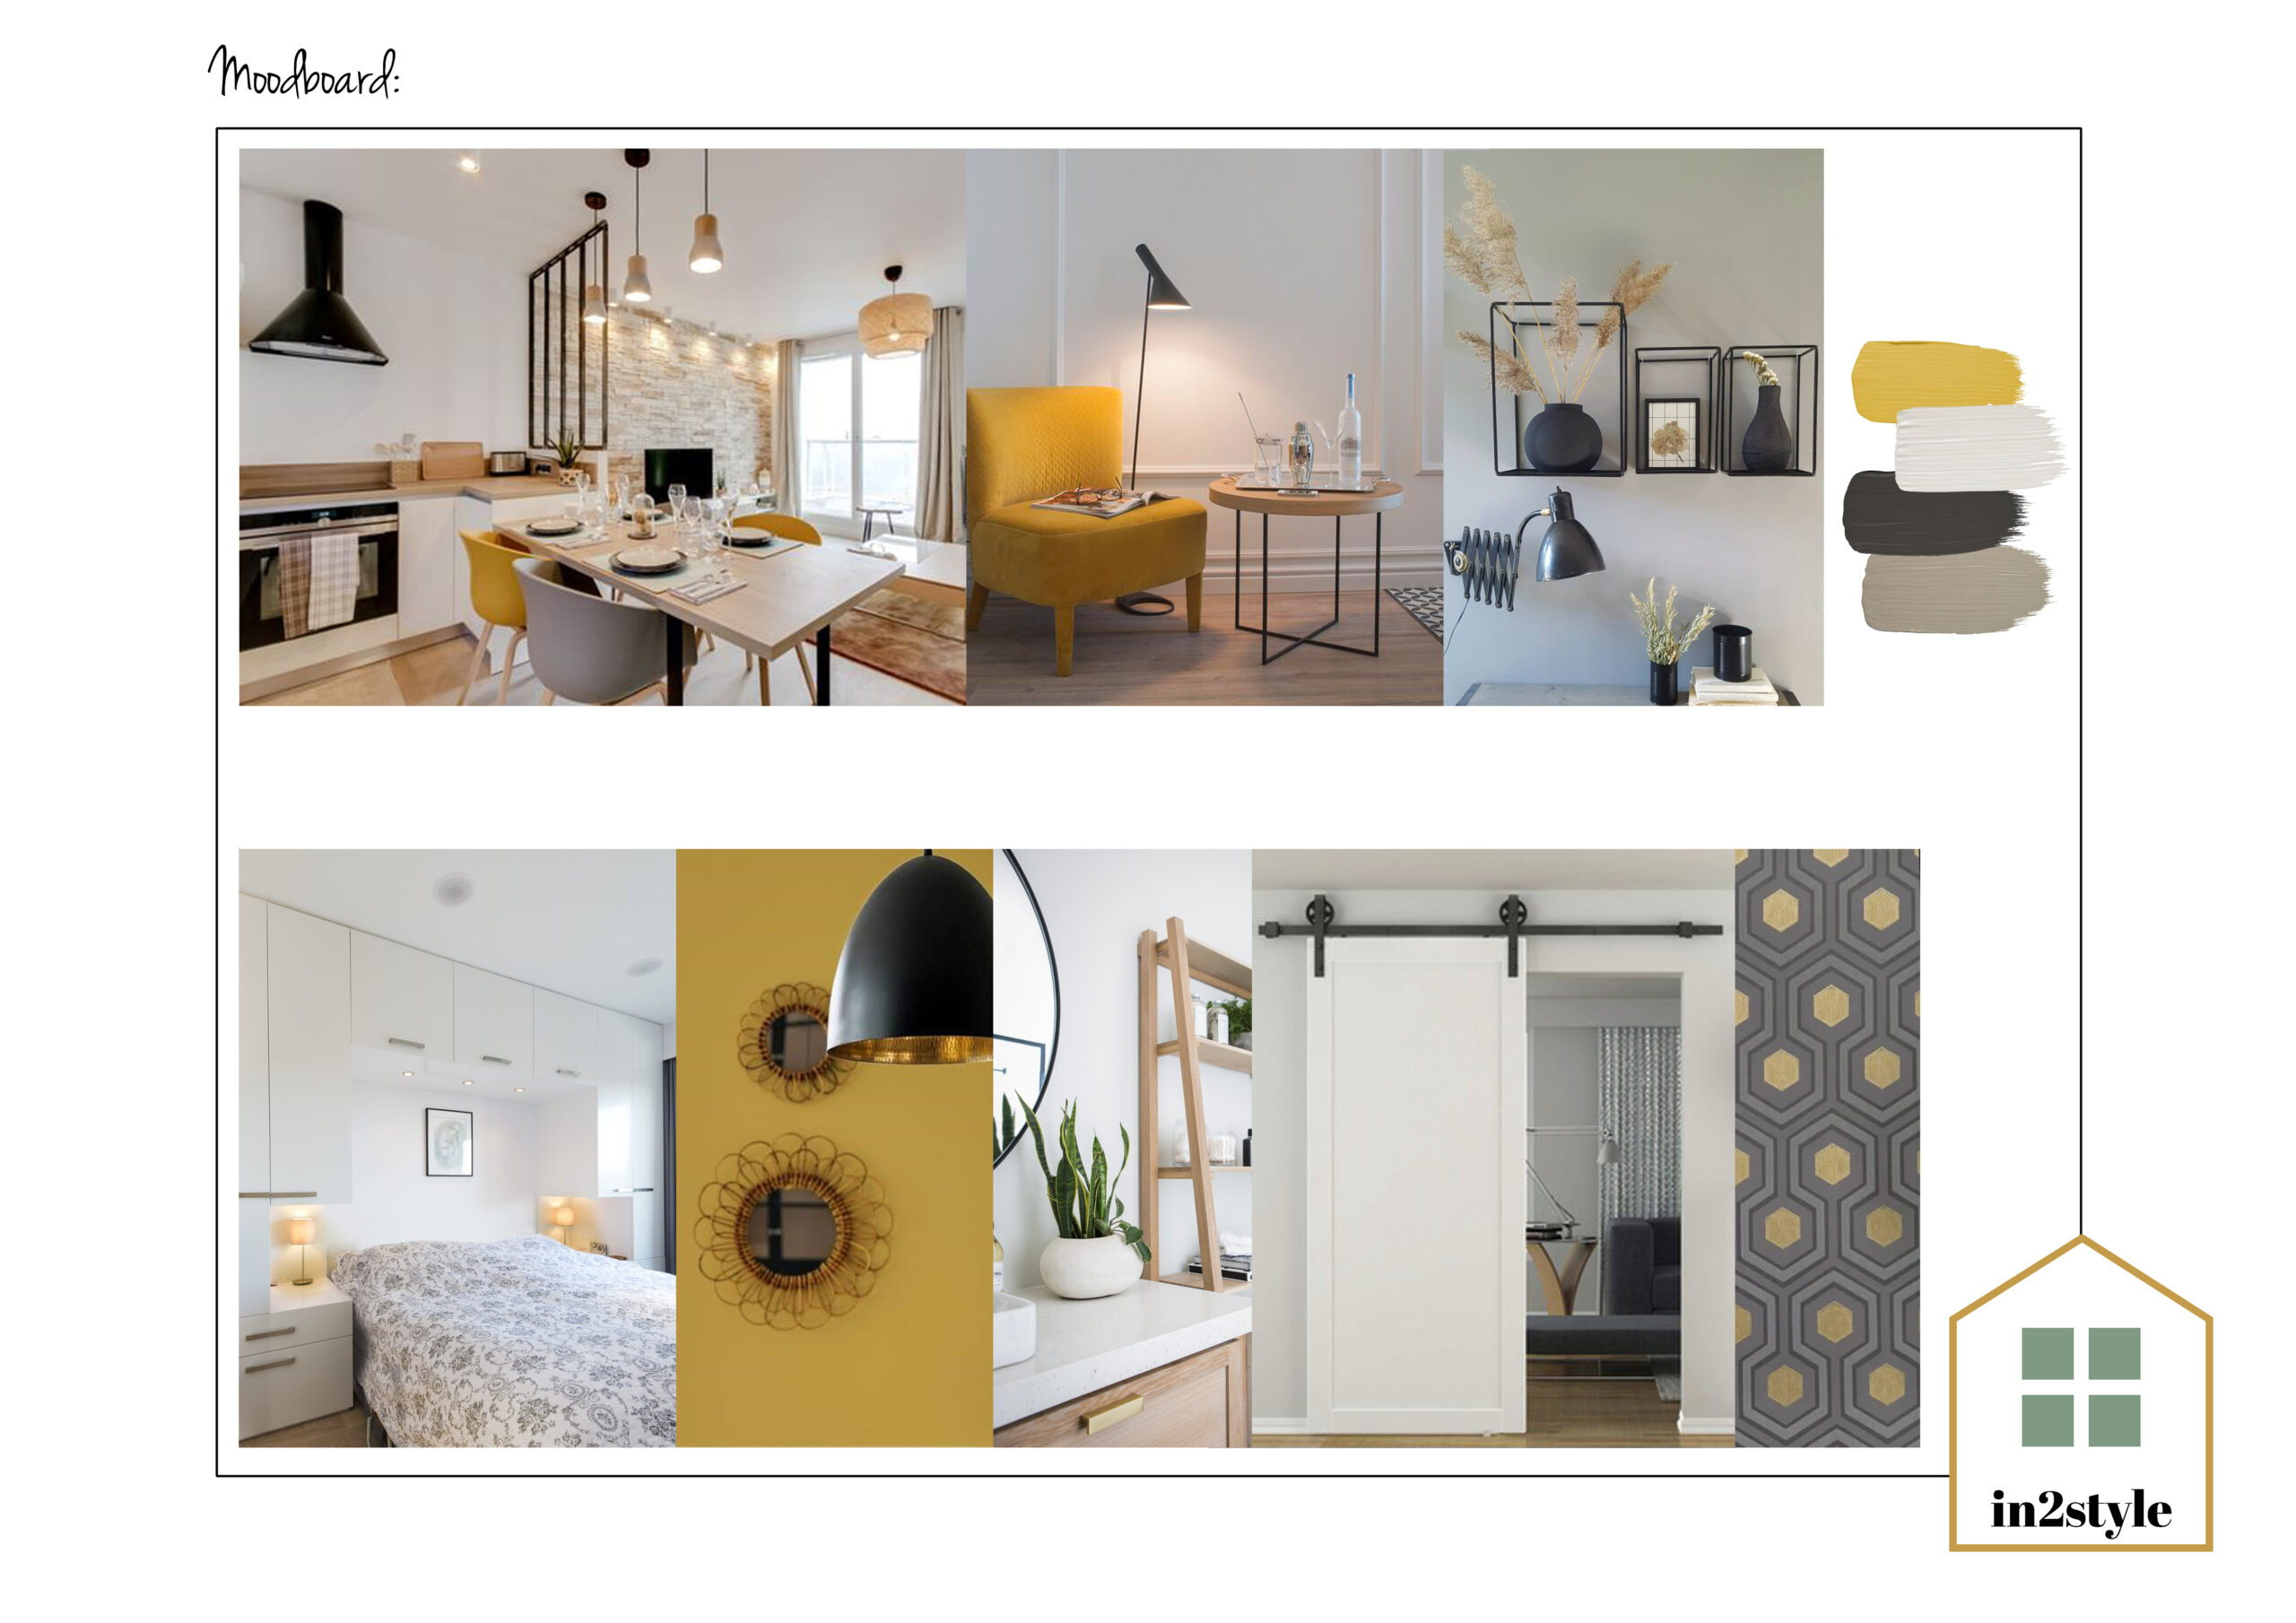 In2style interieuradvies.<br />
Moodboard